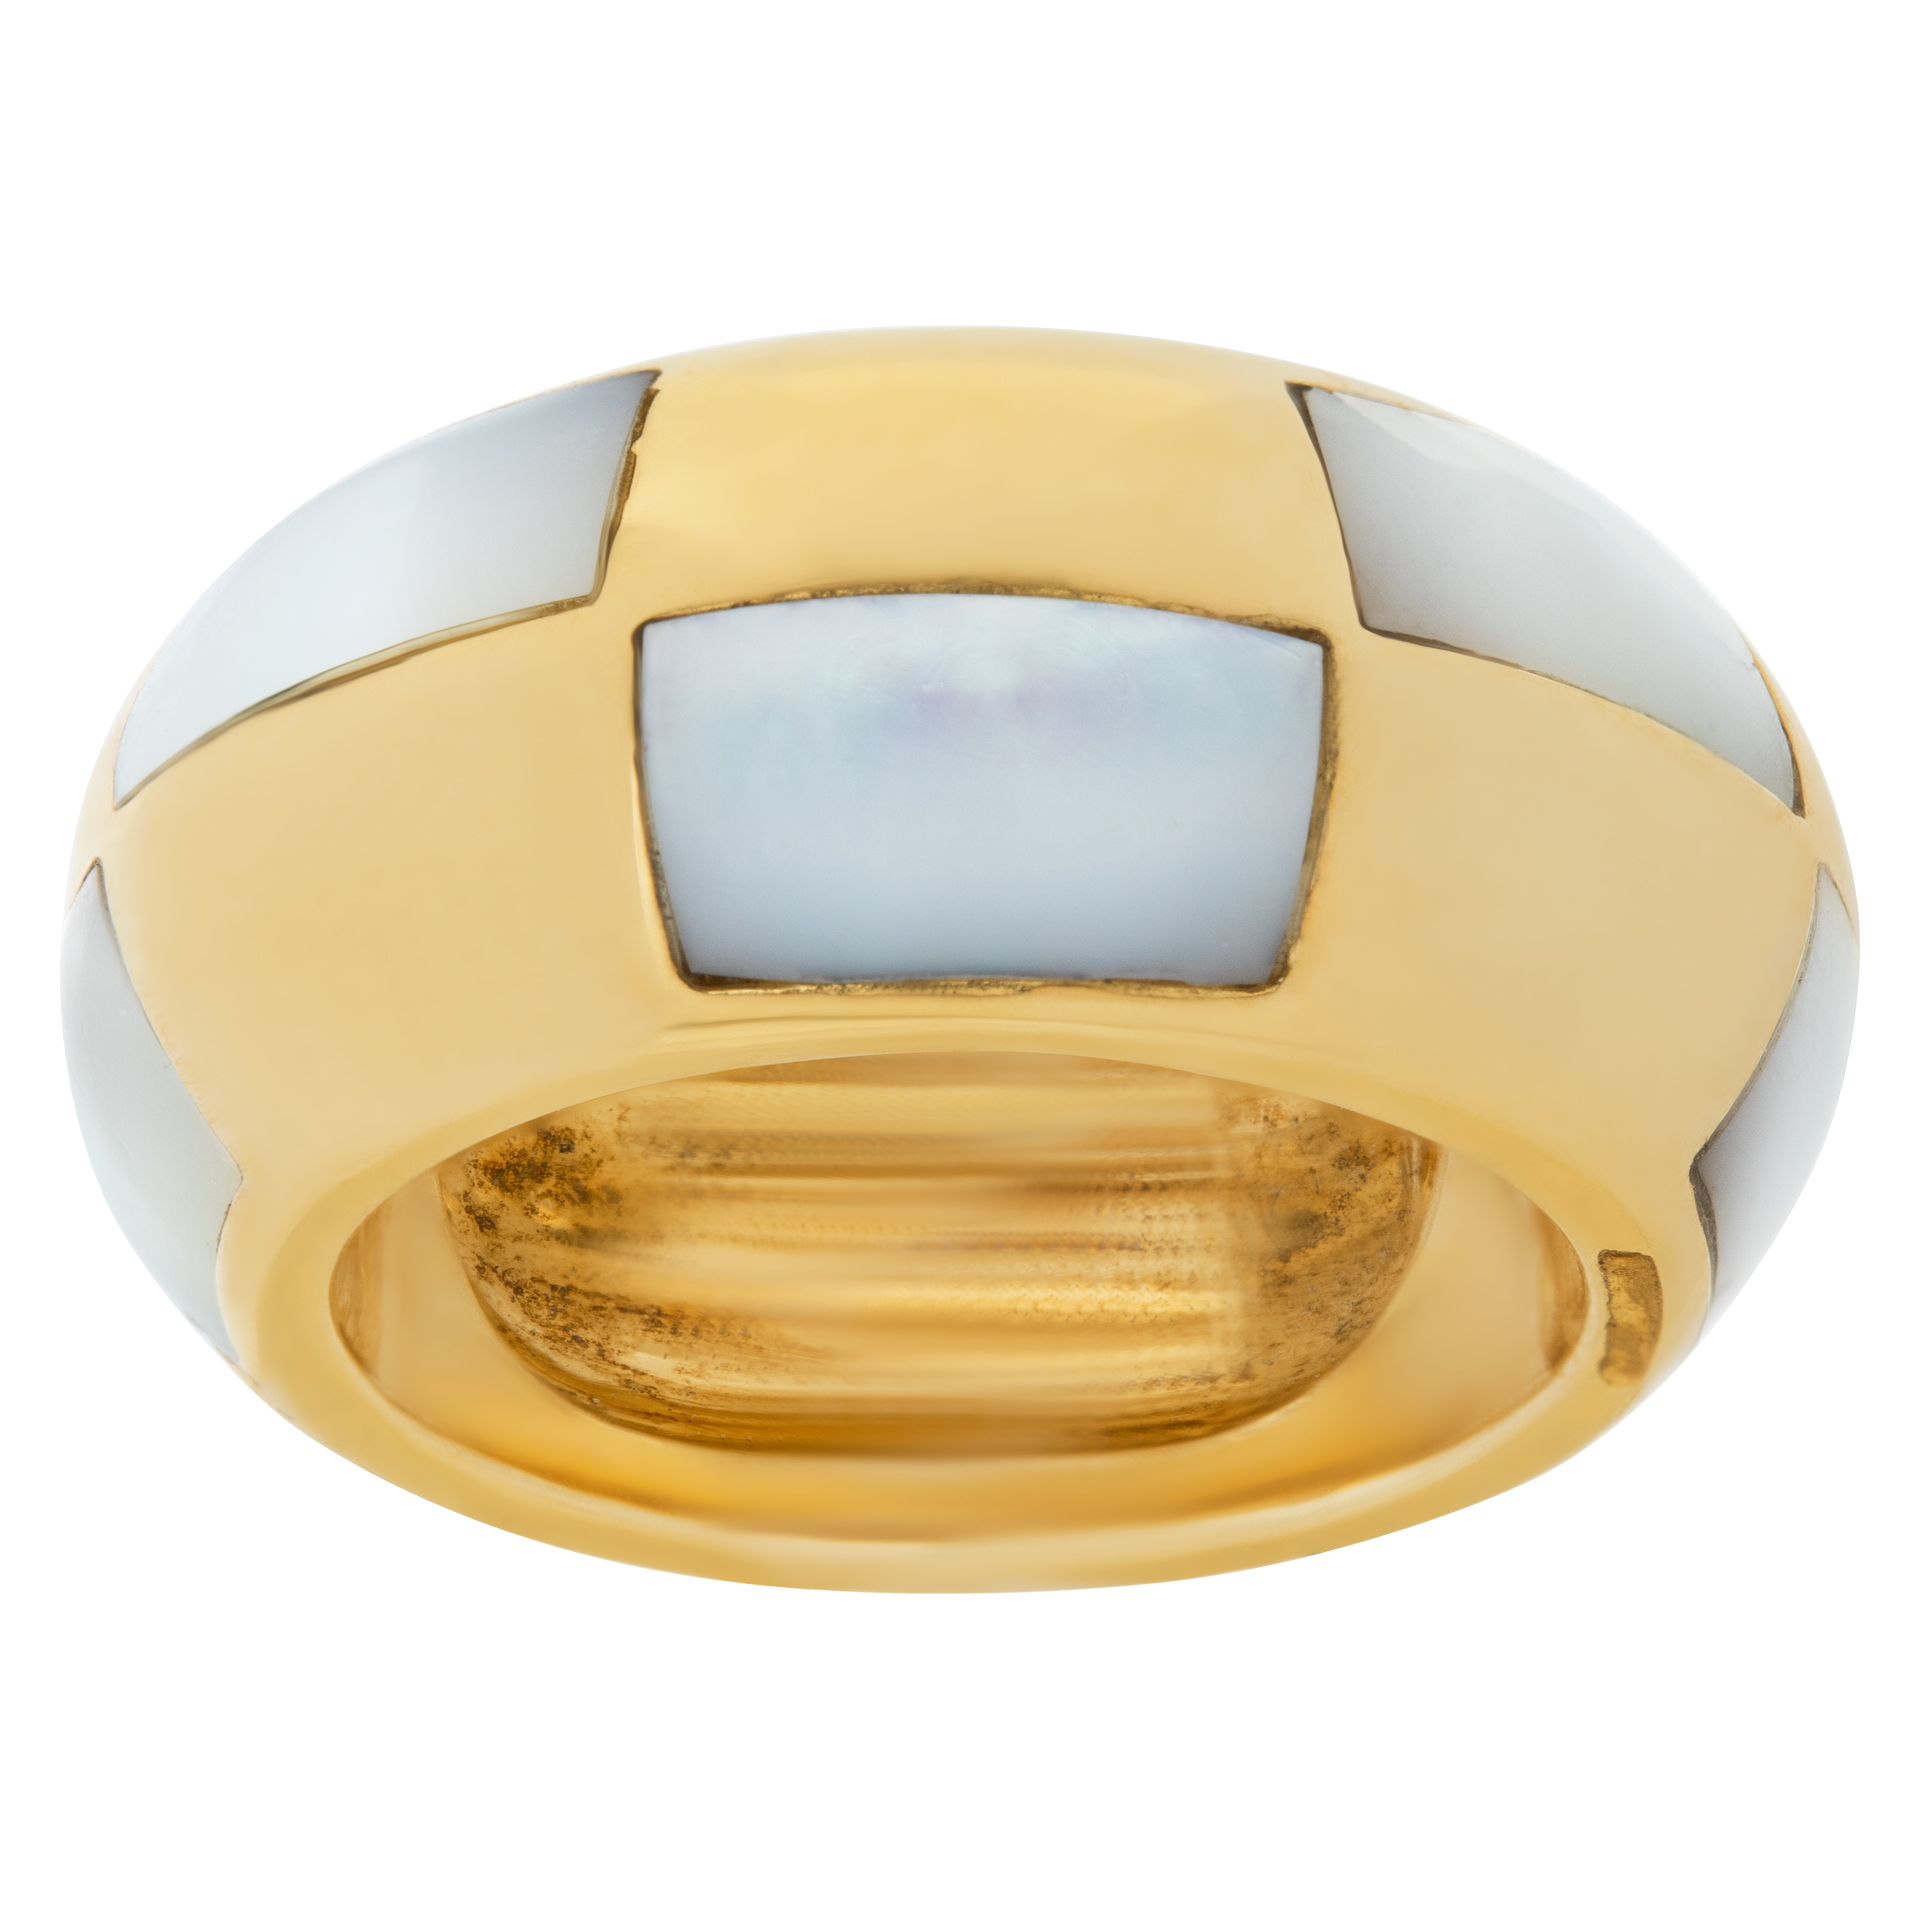 Mauboussin ring in 18k yellow gold with inlaid mother of pearl. Size 5.25 image 1